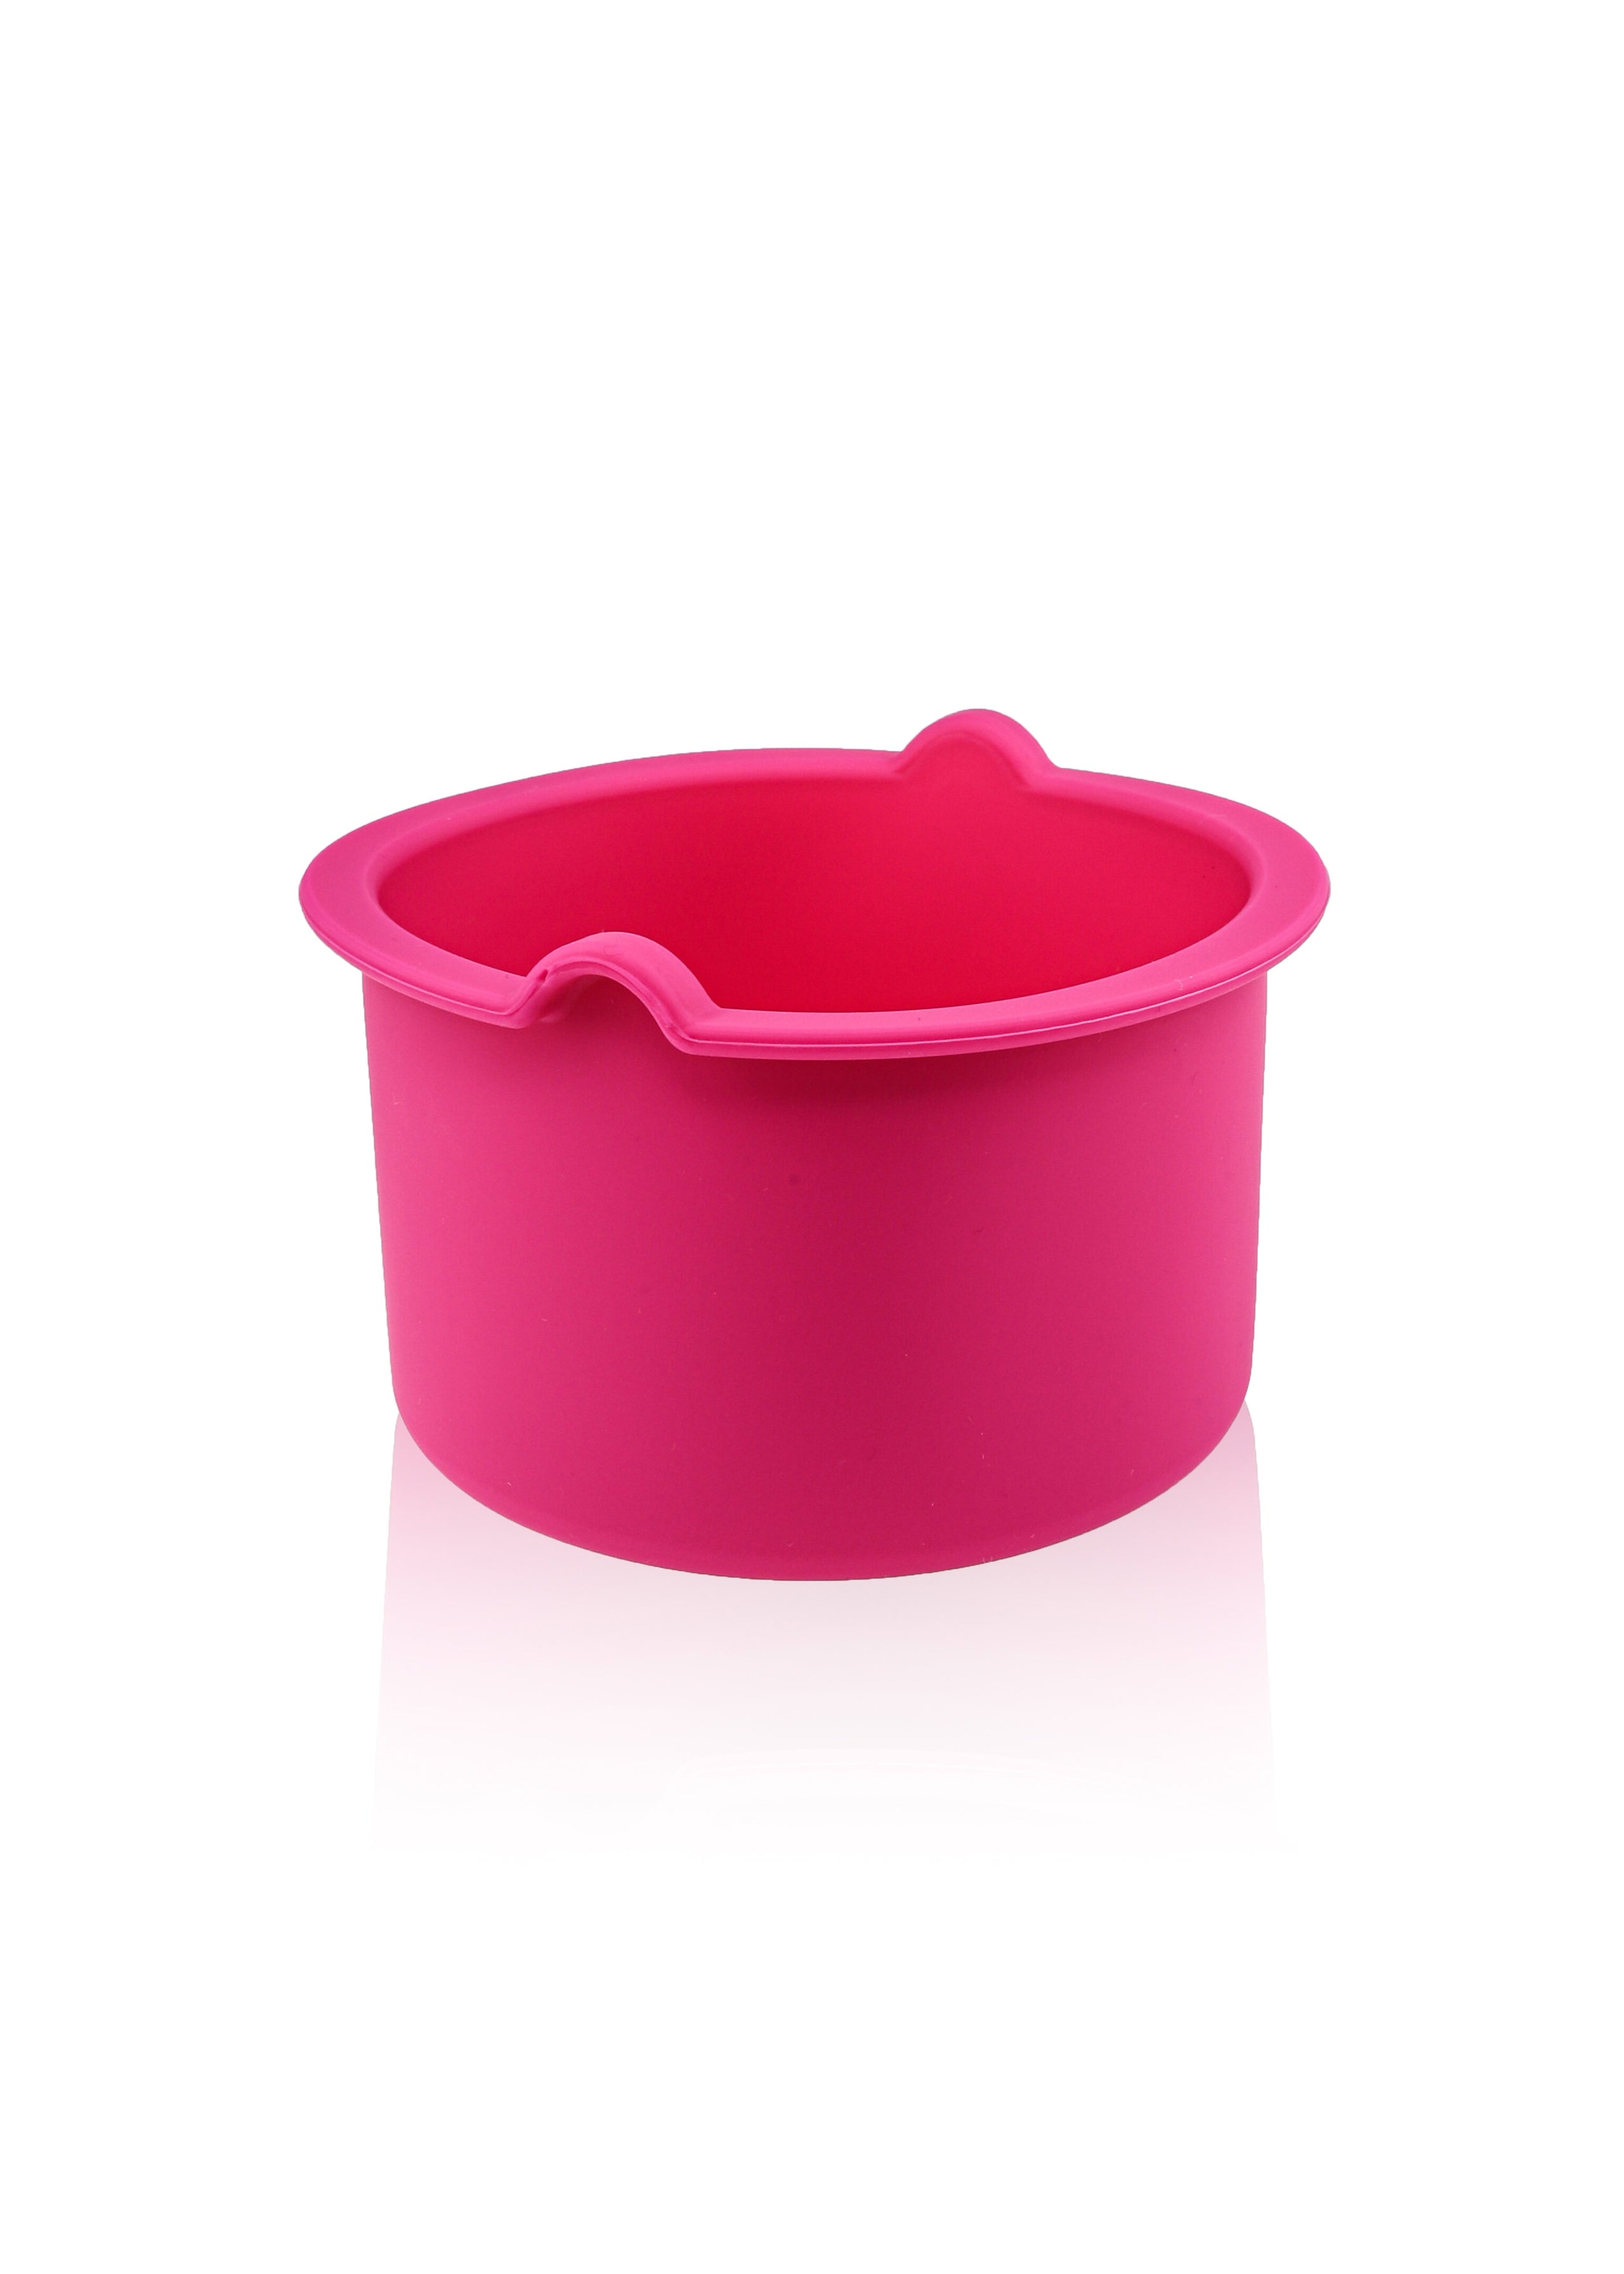 5lb Wax Warmer Efficient Waxing in Pink, Black, Light Blue, and